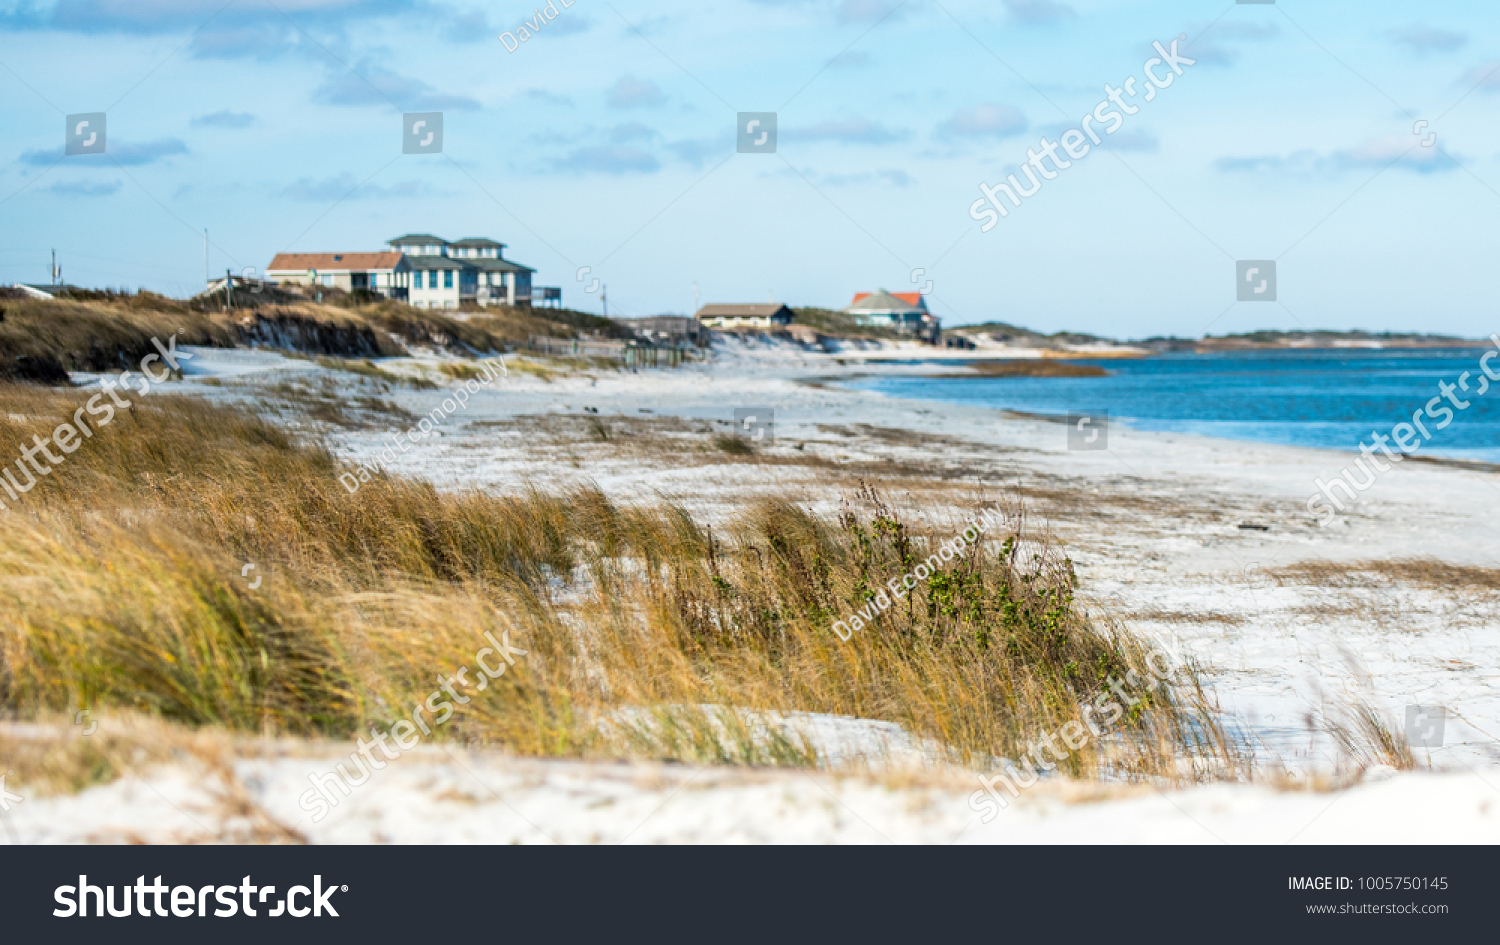 Beach Front Houses at the coast of North Carolina with sand, sea grass and ocean in the foreground. #1005750145